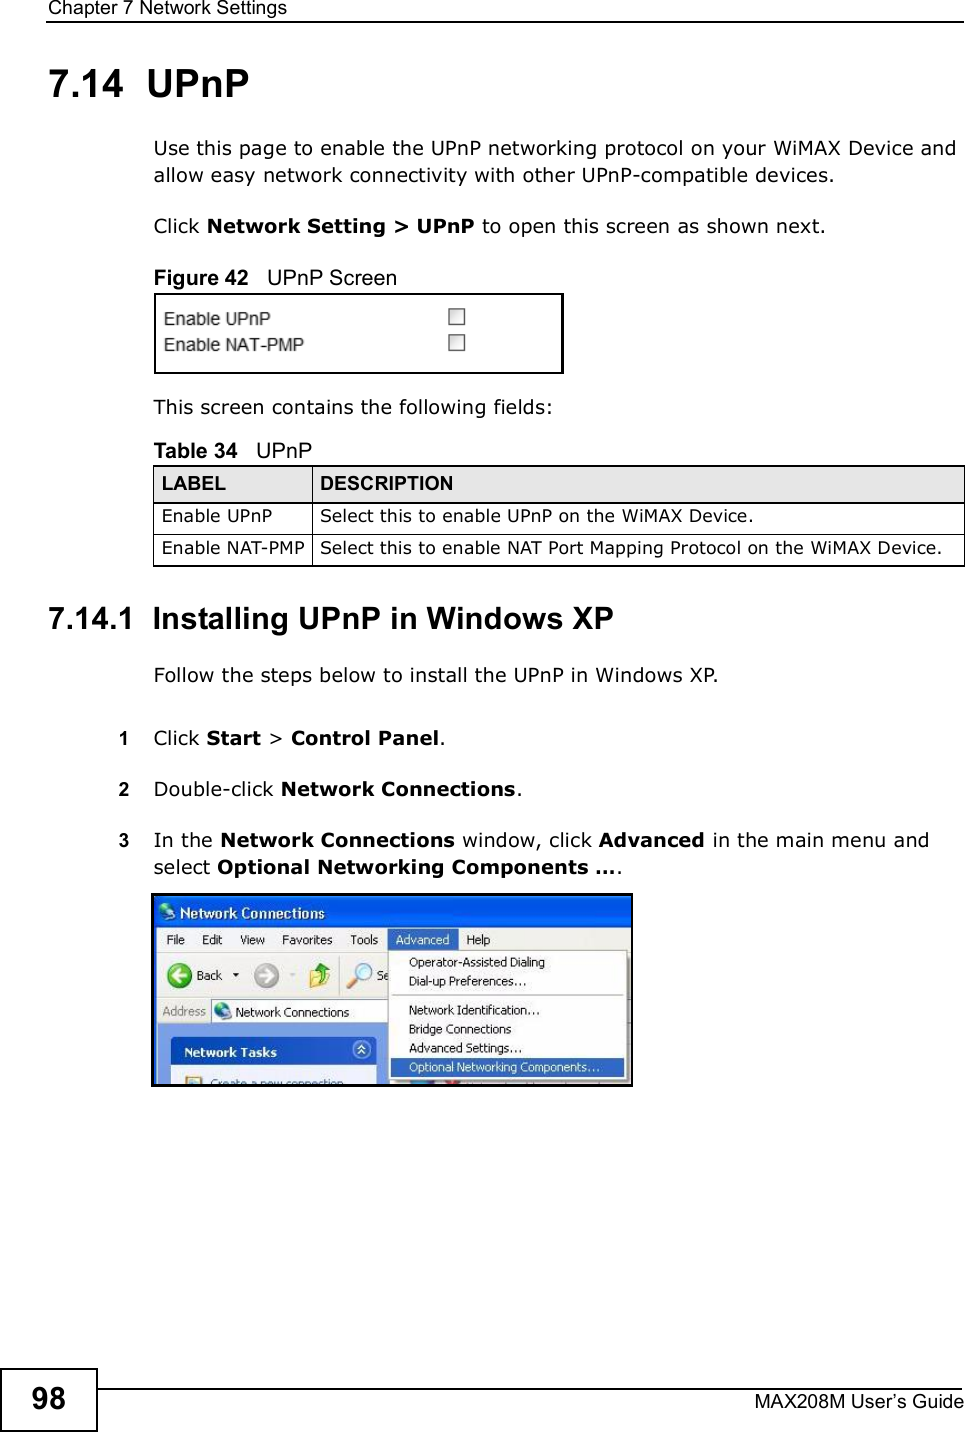 Chapter 7Network SettingsMAX208M User s Guide987.14  UPnPUse this page to enable the UPnP networking protocol on your WiMAX Device and allow easy network connectivity with other UPnP-compatible devices.Click Network Setting &gt; UPnP to open this screen as shown next.Figure 42   UPnP ScreenThis screen contains the following fields:7.14.1  Installing UPnP in Windows XPFollow the steps below to install the UPnP in Windows XP.1Click Start &gt; Control Panel. 2Double-click Network Connections.3In the Network Connections window, click Advanced in the main menu and select Optional Networking Components  . Table 34   UPnPLABEL DESCRIPTIONEnable UPnPSelect this to enable UPnP on the WiMAX Device.Enable NAT-PMPSelect this to enable NAT Port Mapping Protocol on the WiMAX Device.